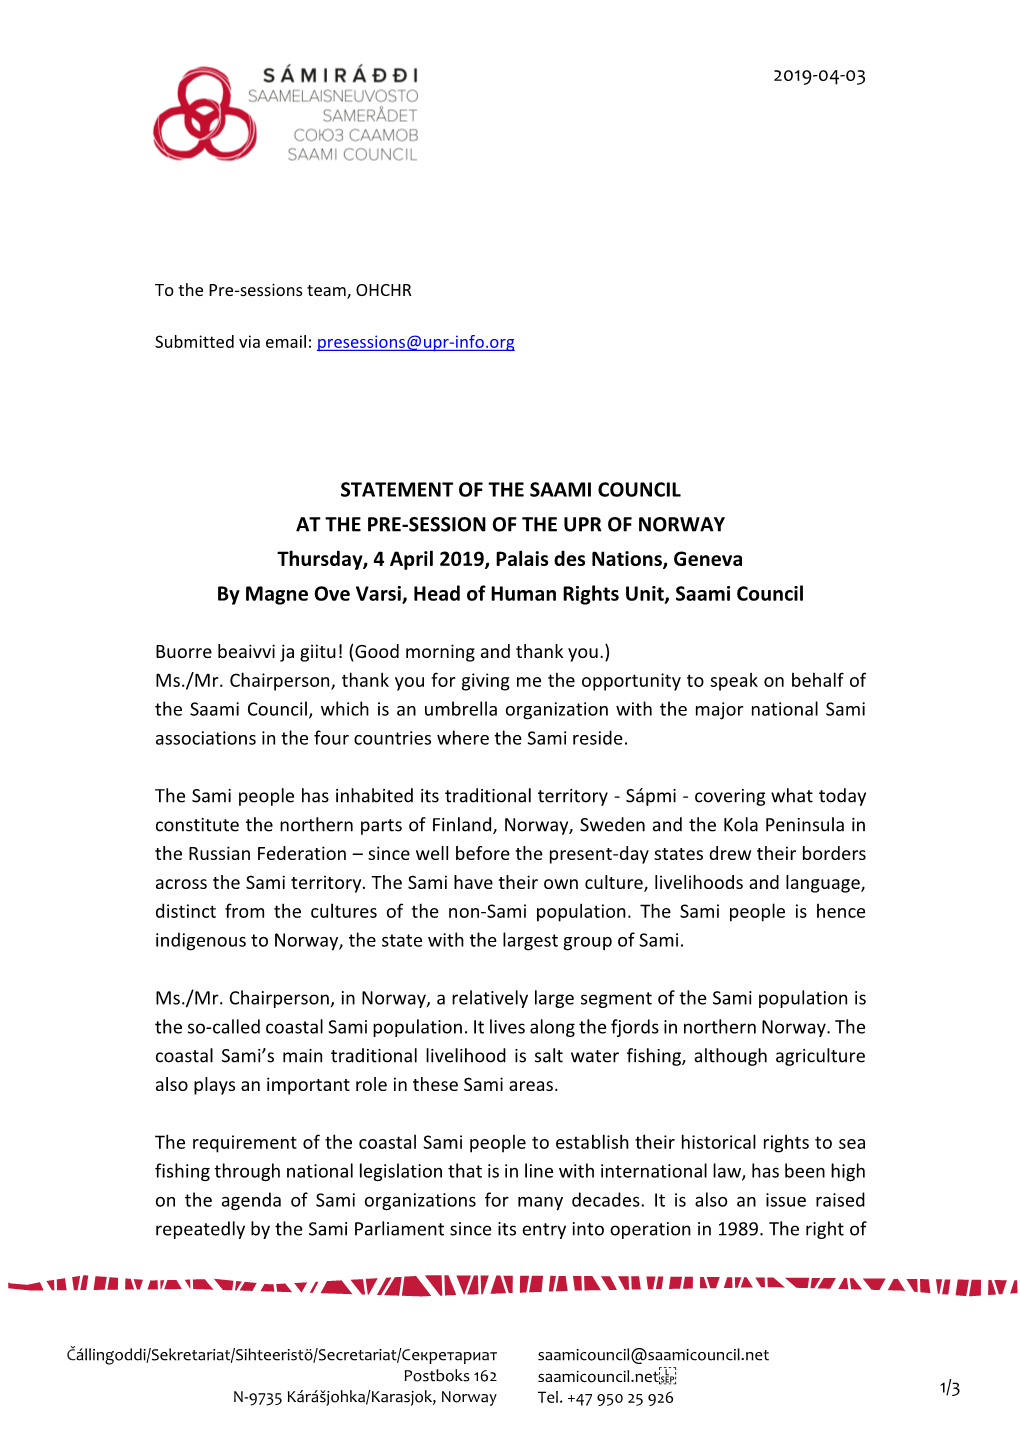 STATEMENT of the SAAMI COUNCIL at the PRE-SESSION of the UPR of NORWAY Thursday, 4 April 2019, Palais Des Nations, Geneva by M